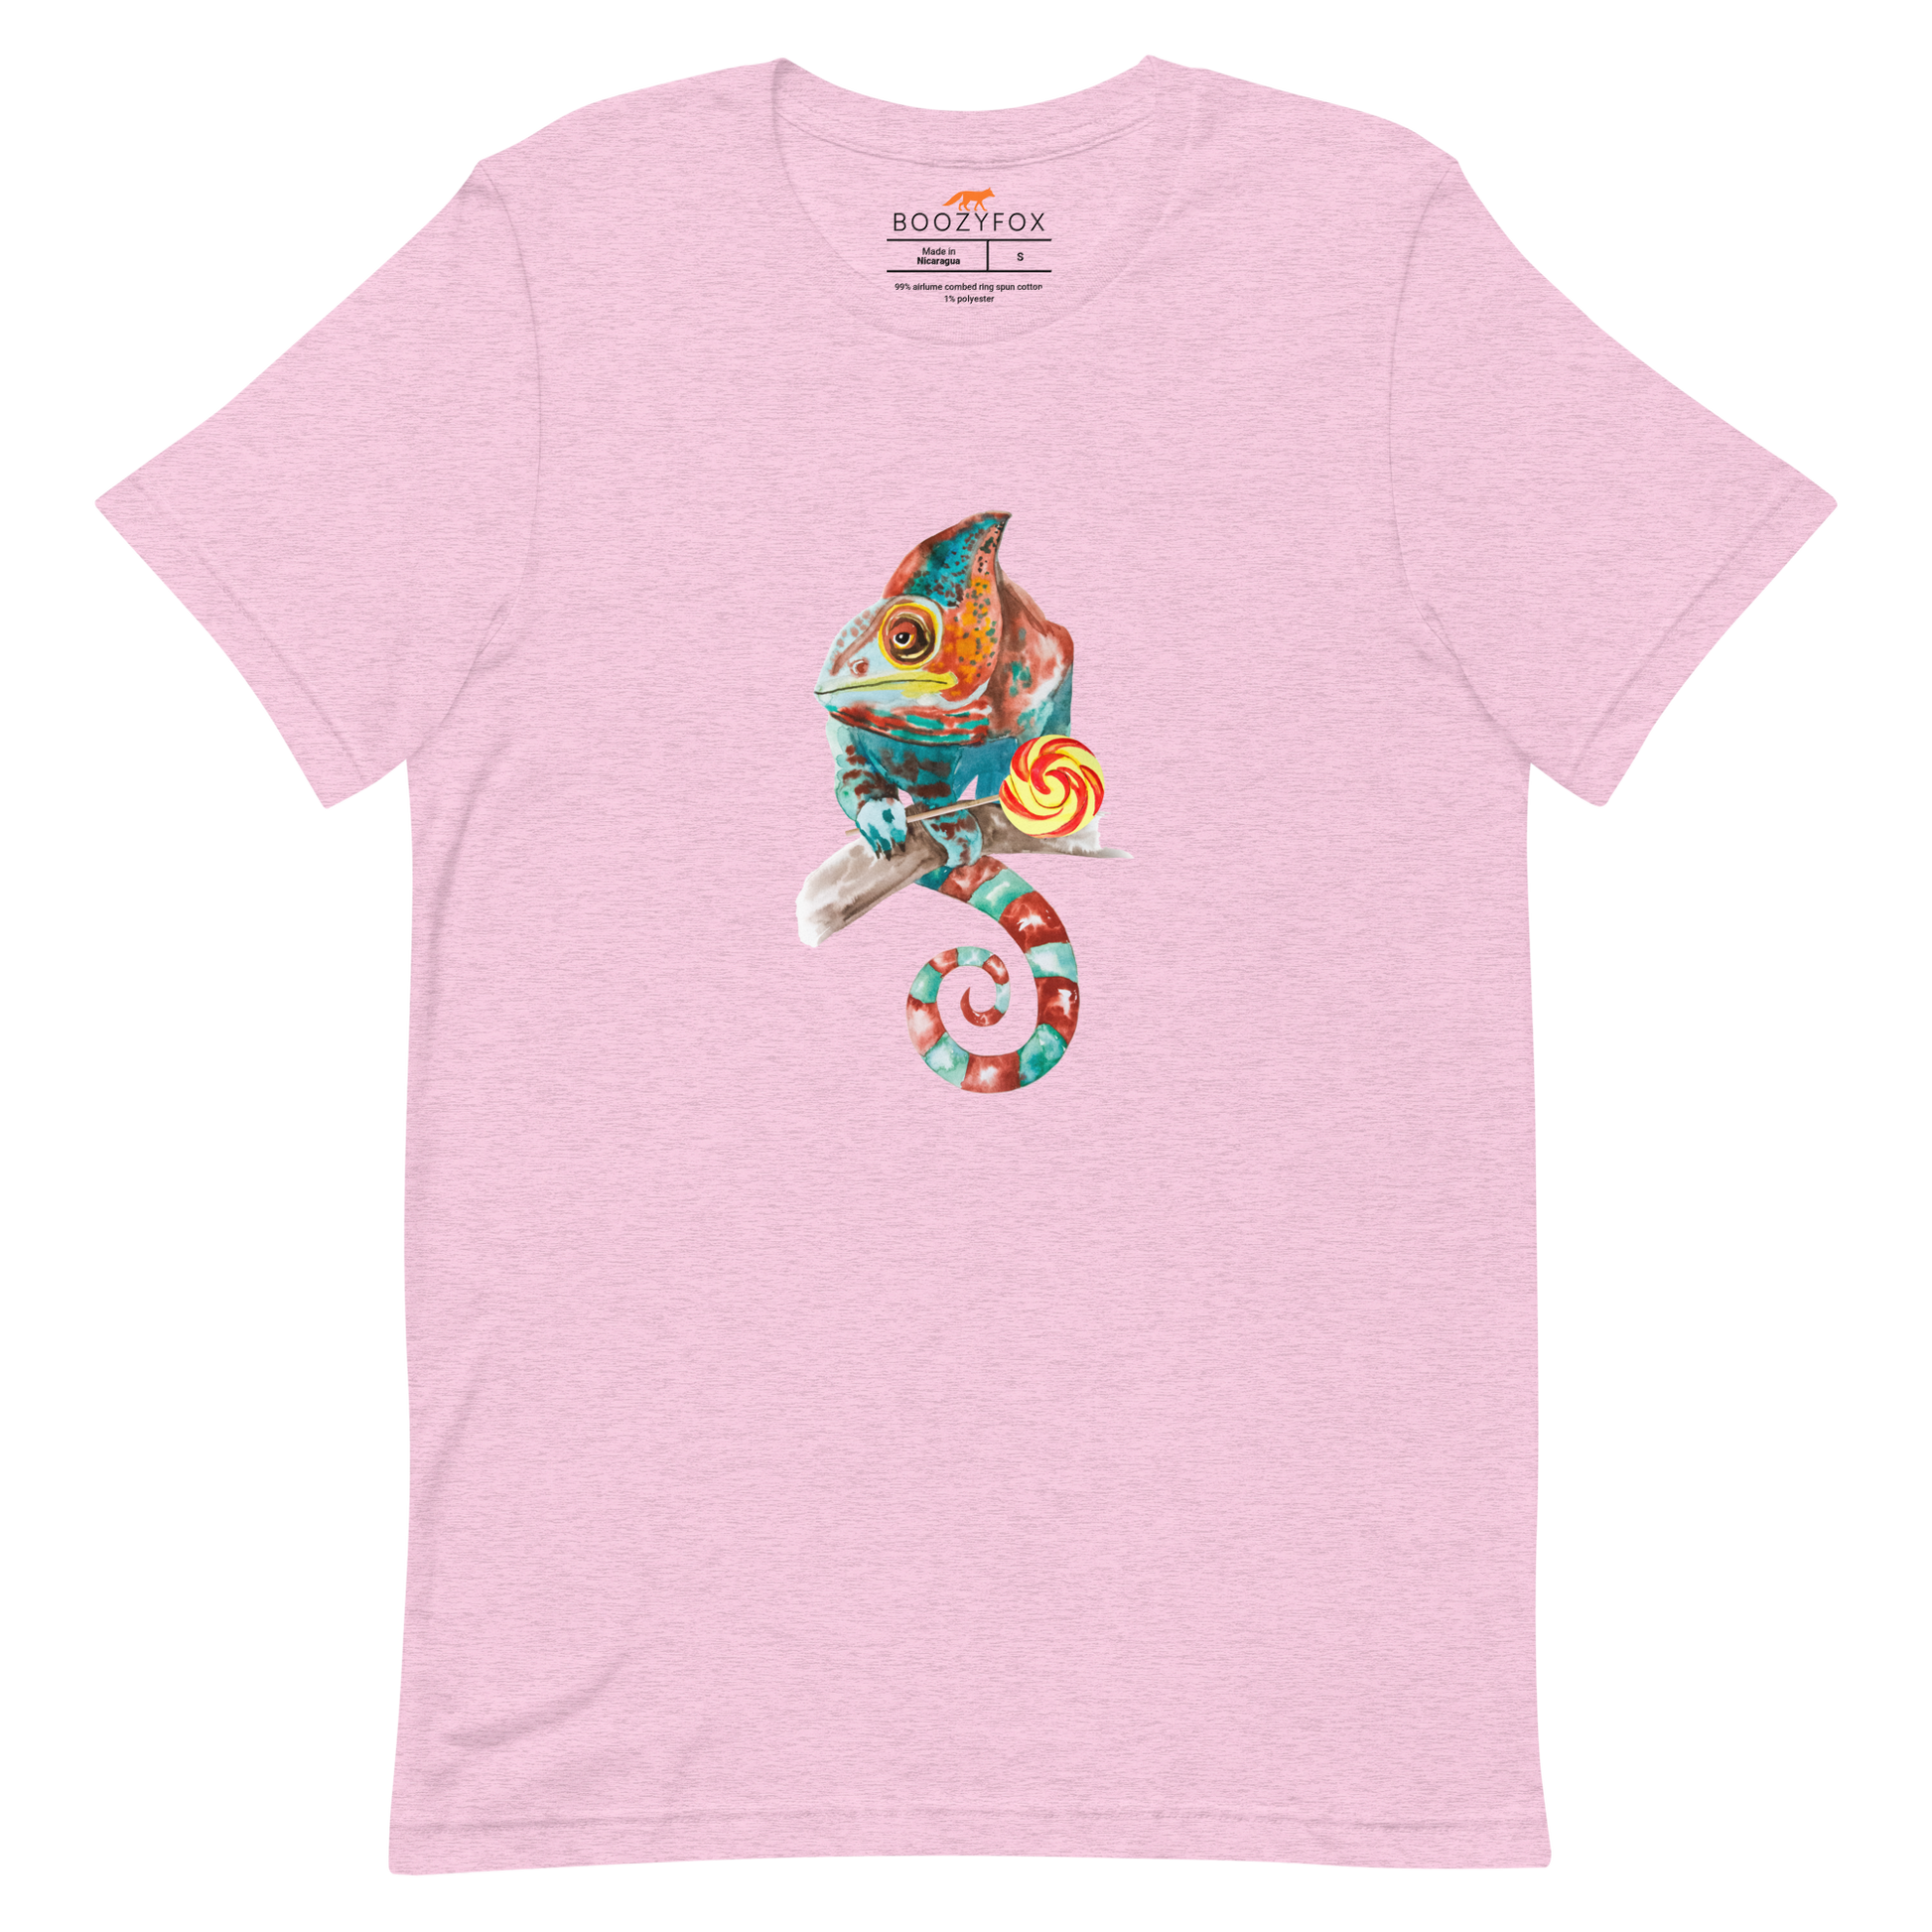 Heather Prism Lilac Premium Chameleon T-Shirt featuring a charming Chameleon With A Lollipop graphic on the chest - Cool Graphic Chameleon Tees - Boozy Fox